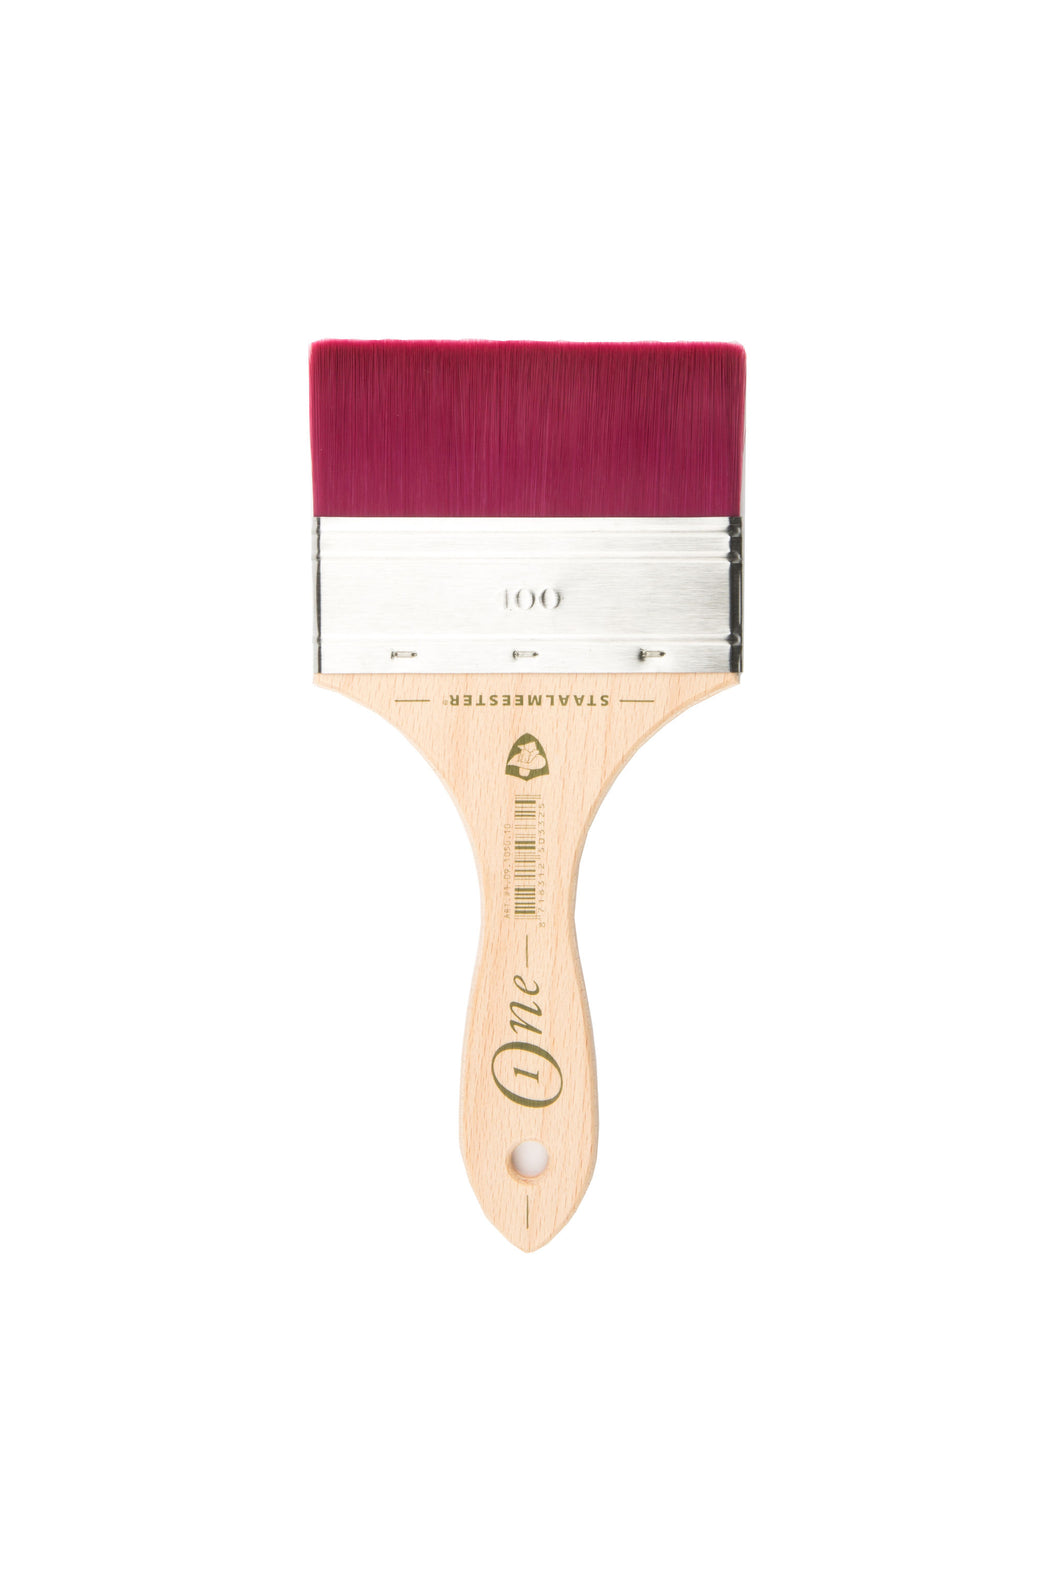 Staalmeester ONE Wide Flat  #10 Brush